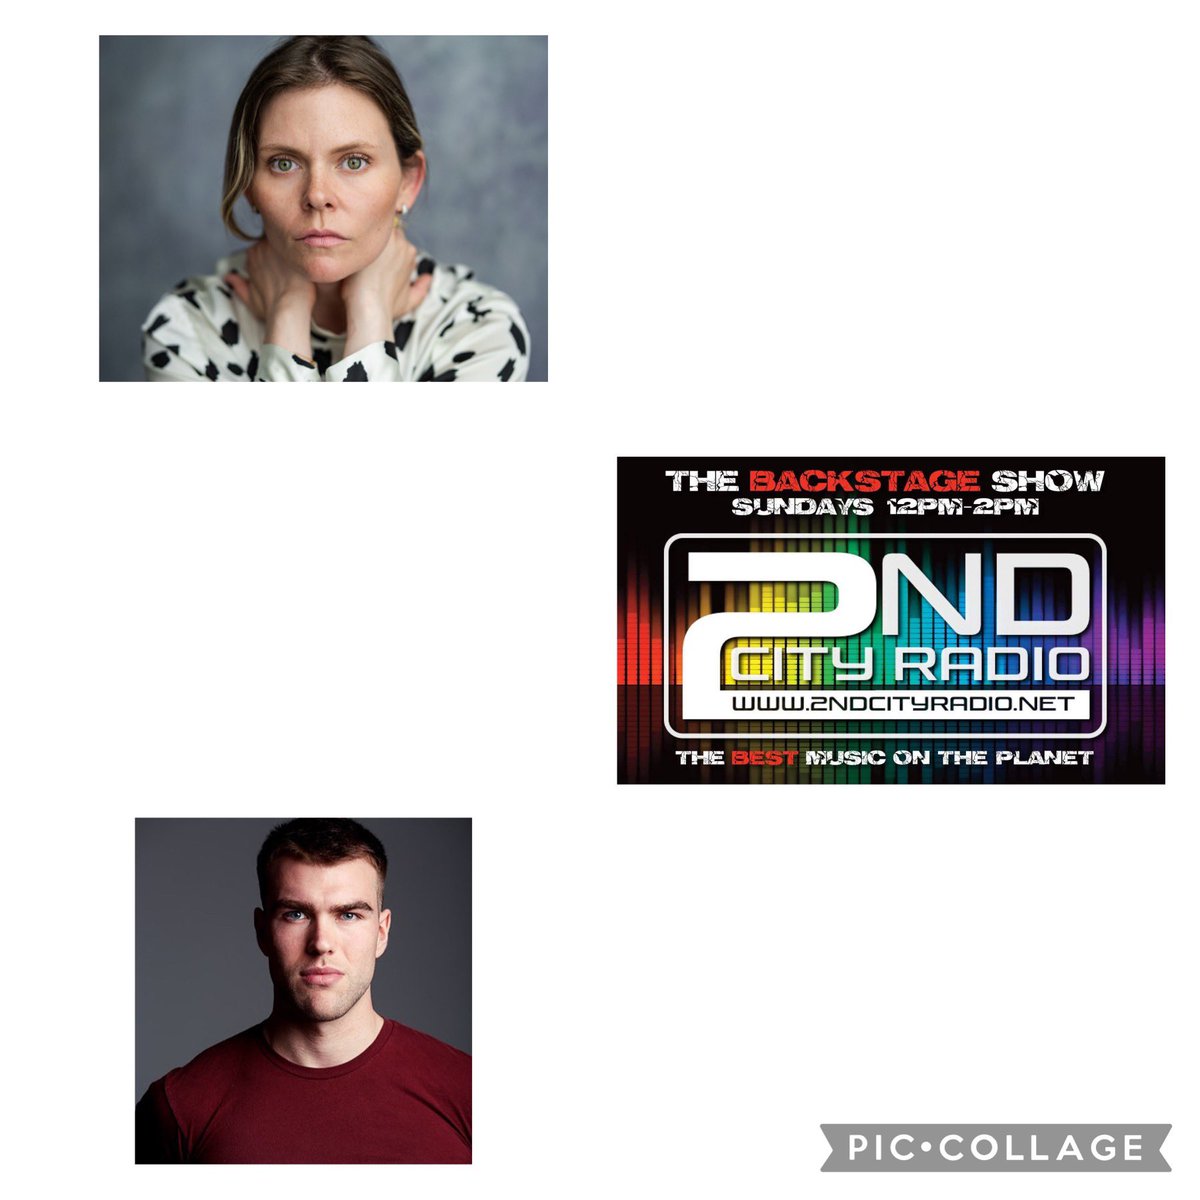 Completing this weekend’s guest line up #Backstage @SECONDCITYRADIO Rebecca Blackstone and Tom Kay are appearing in “Banging Denmark” @finborough Tune in live from midday on Sunday 2ndcityradio.net #theatre @tpprodsuk